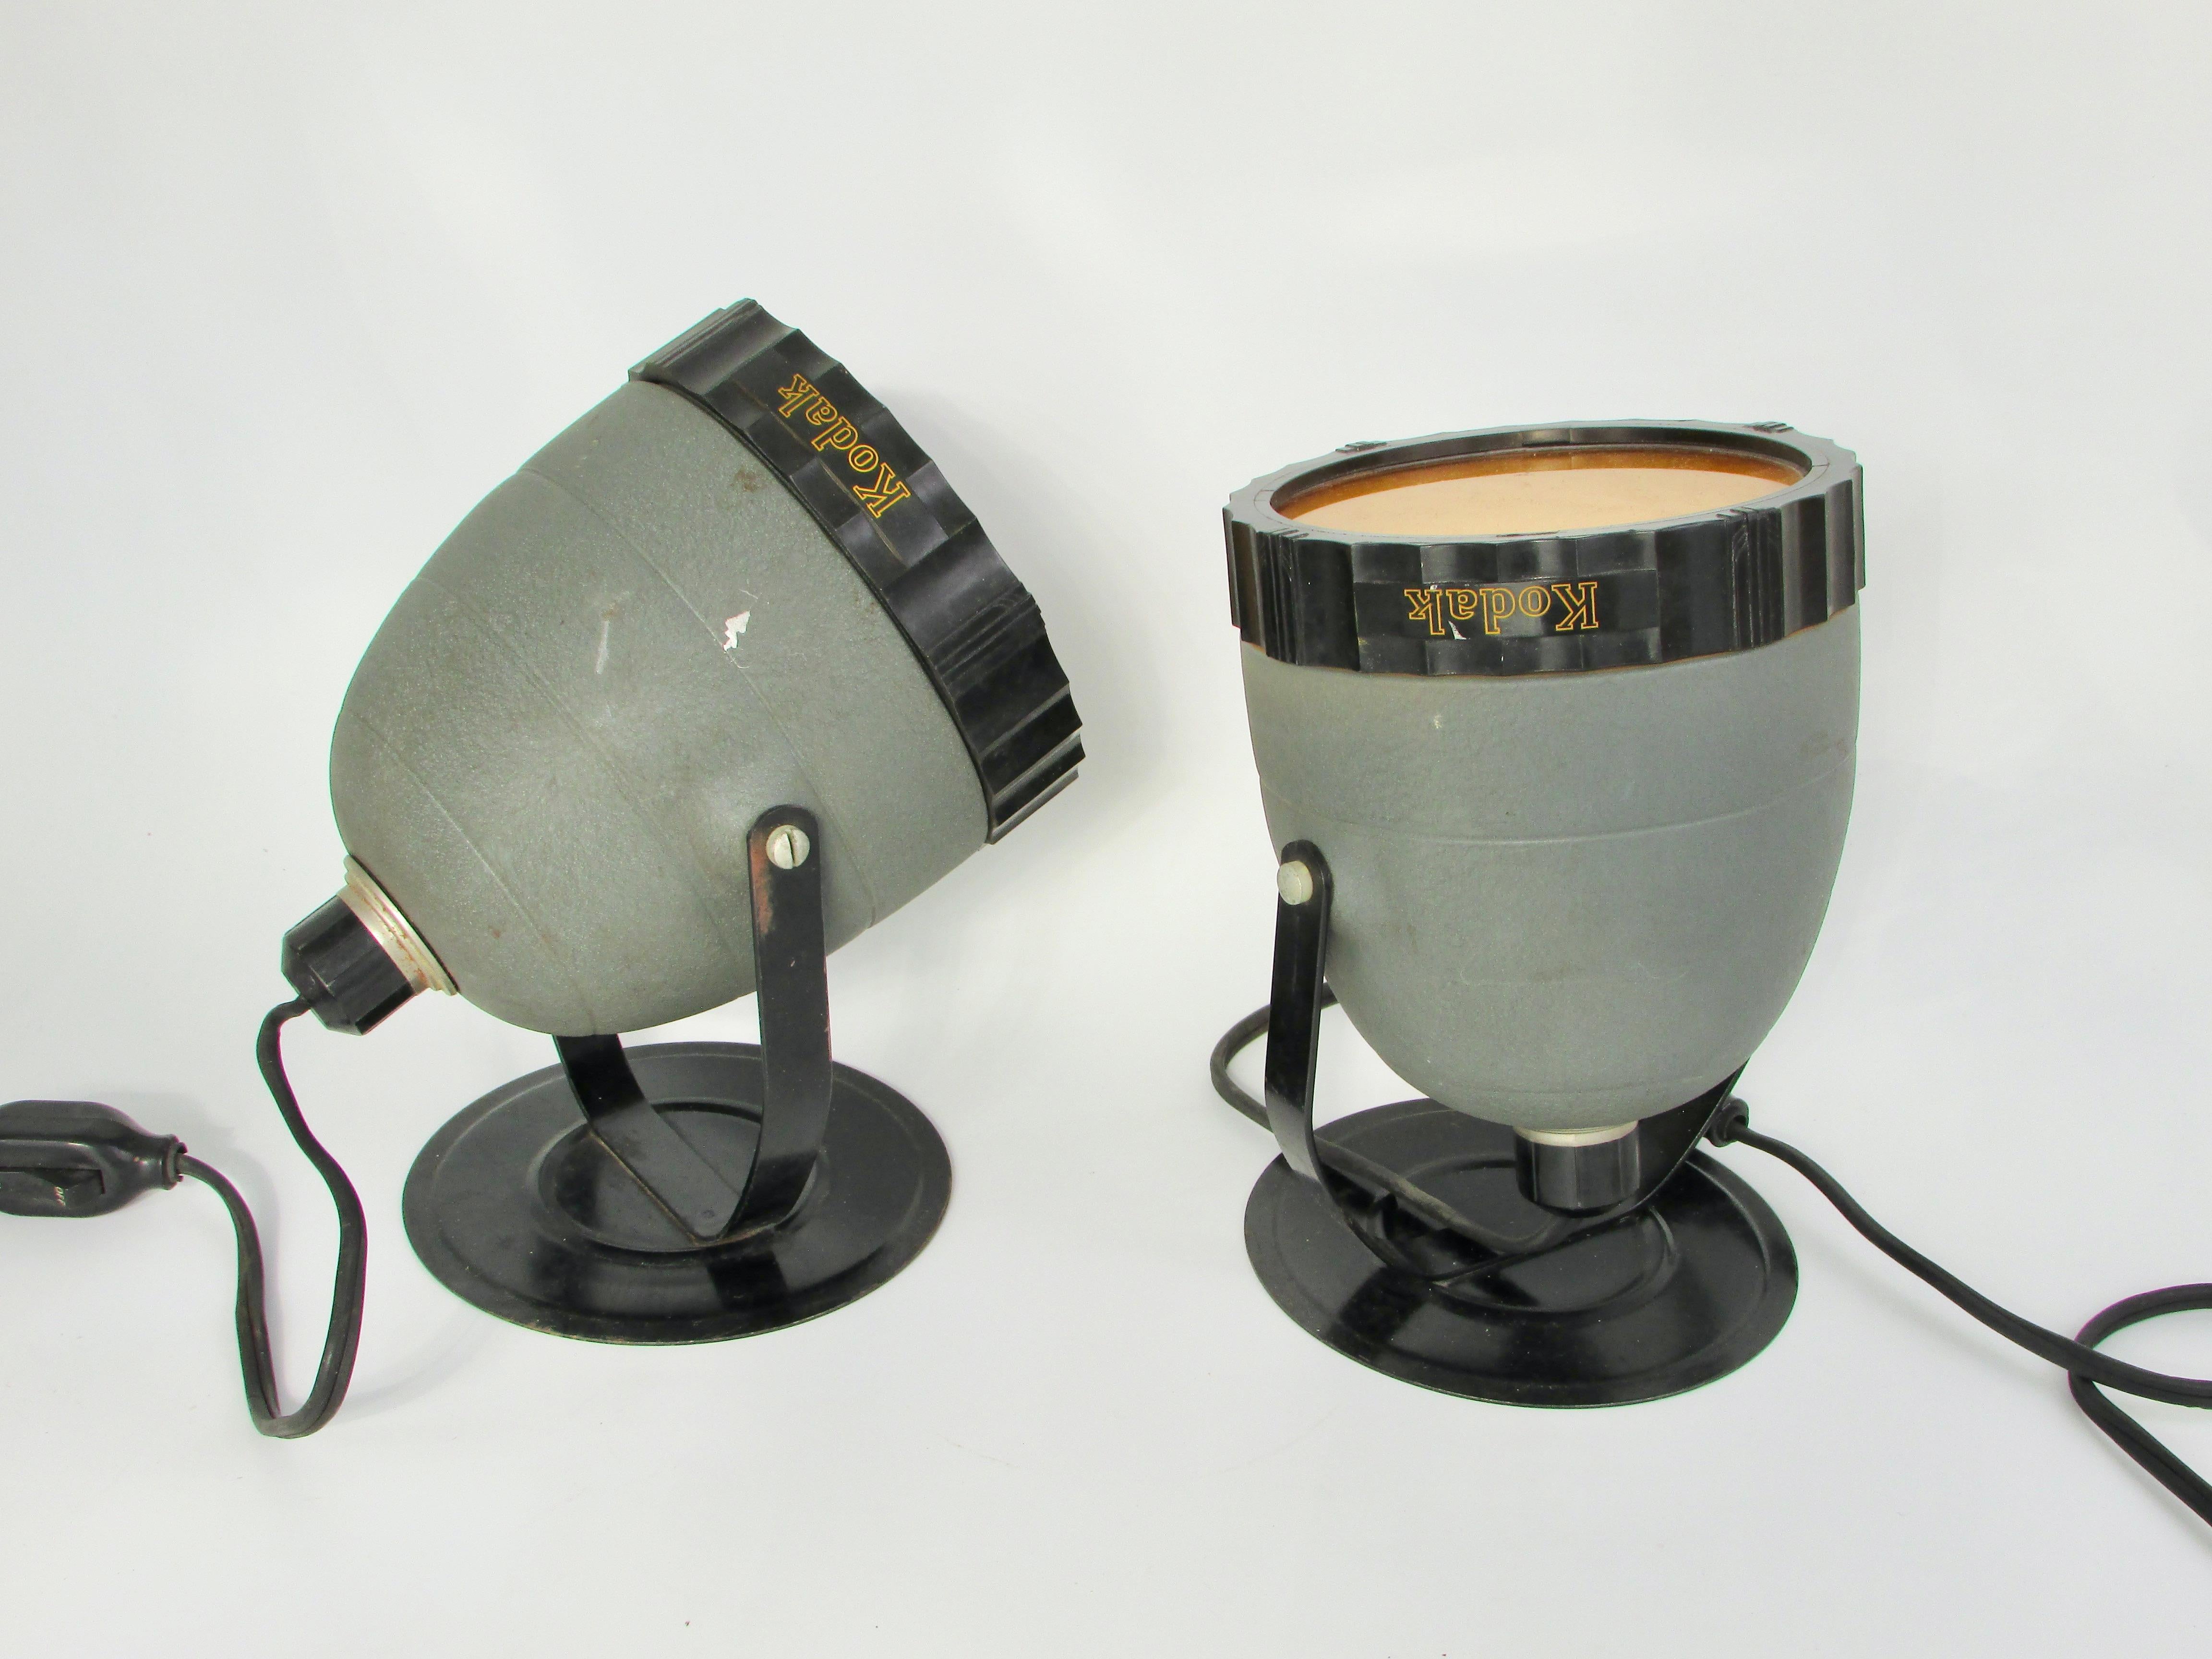 Pair of Eastman Kodak photography lamps in the Art Deco style . Recent estate purchase shown as found . Original cords and switches in fine working order . One lamp retains wall mounting flange .